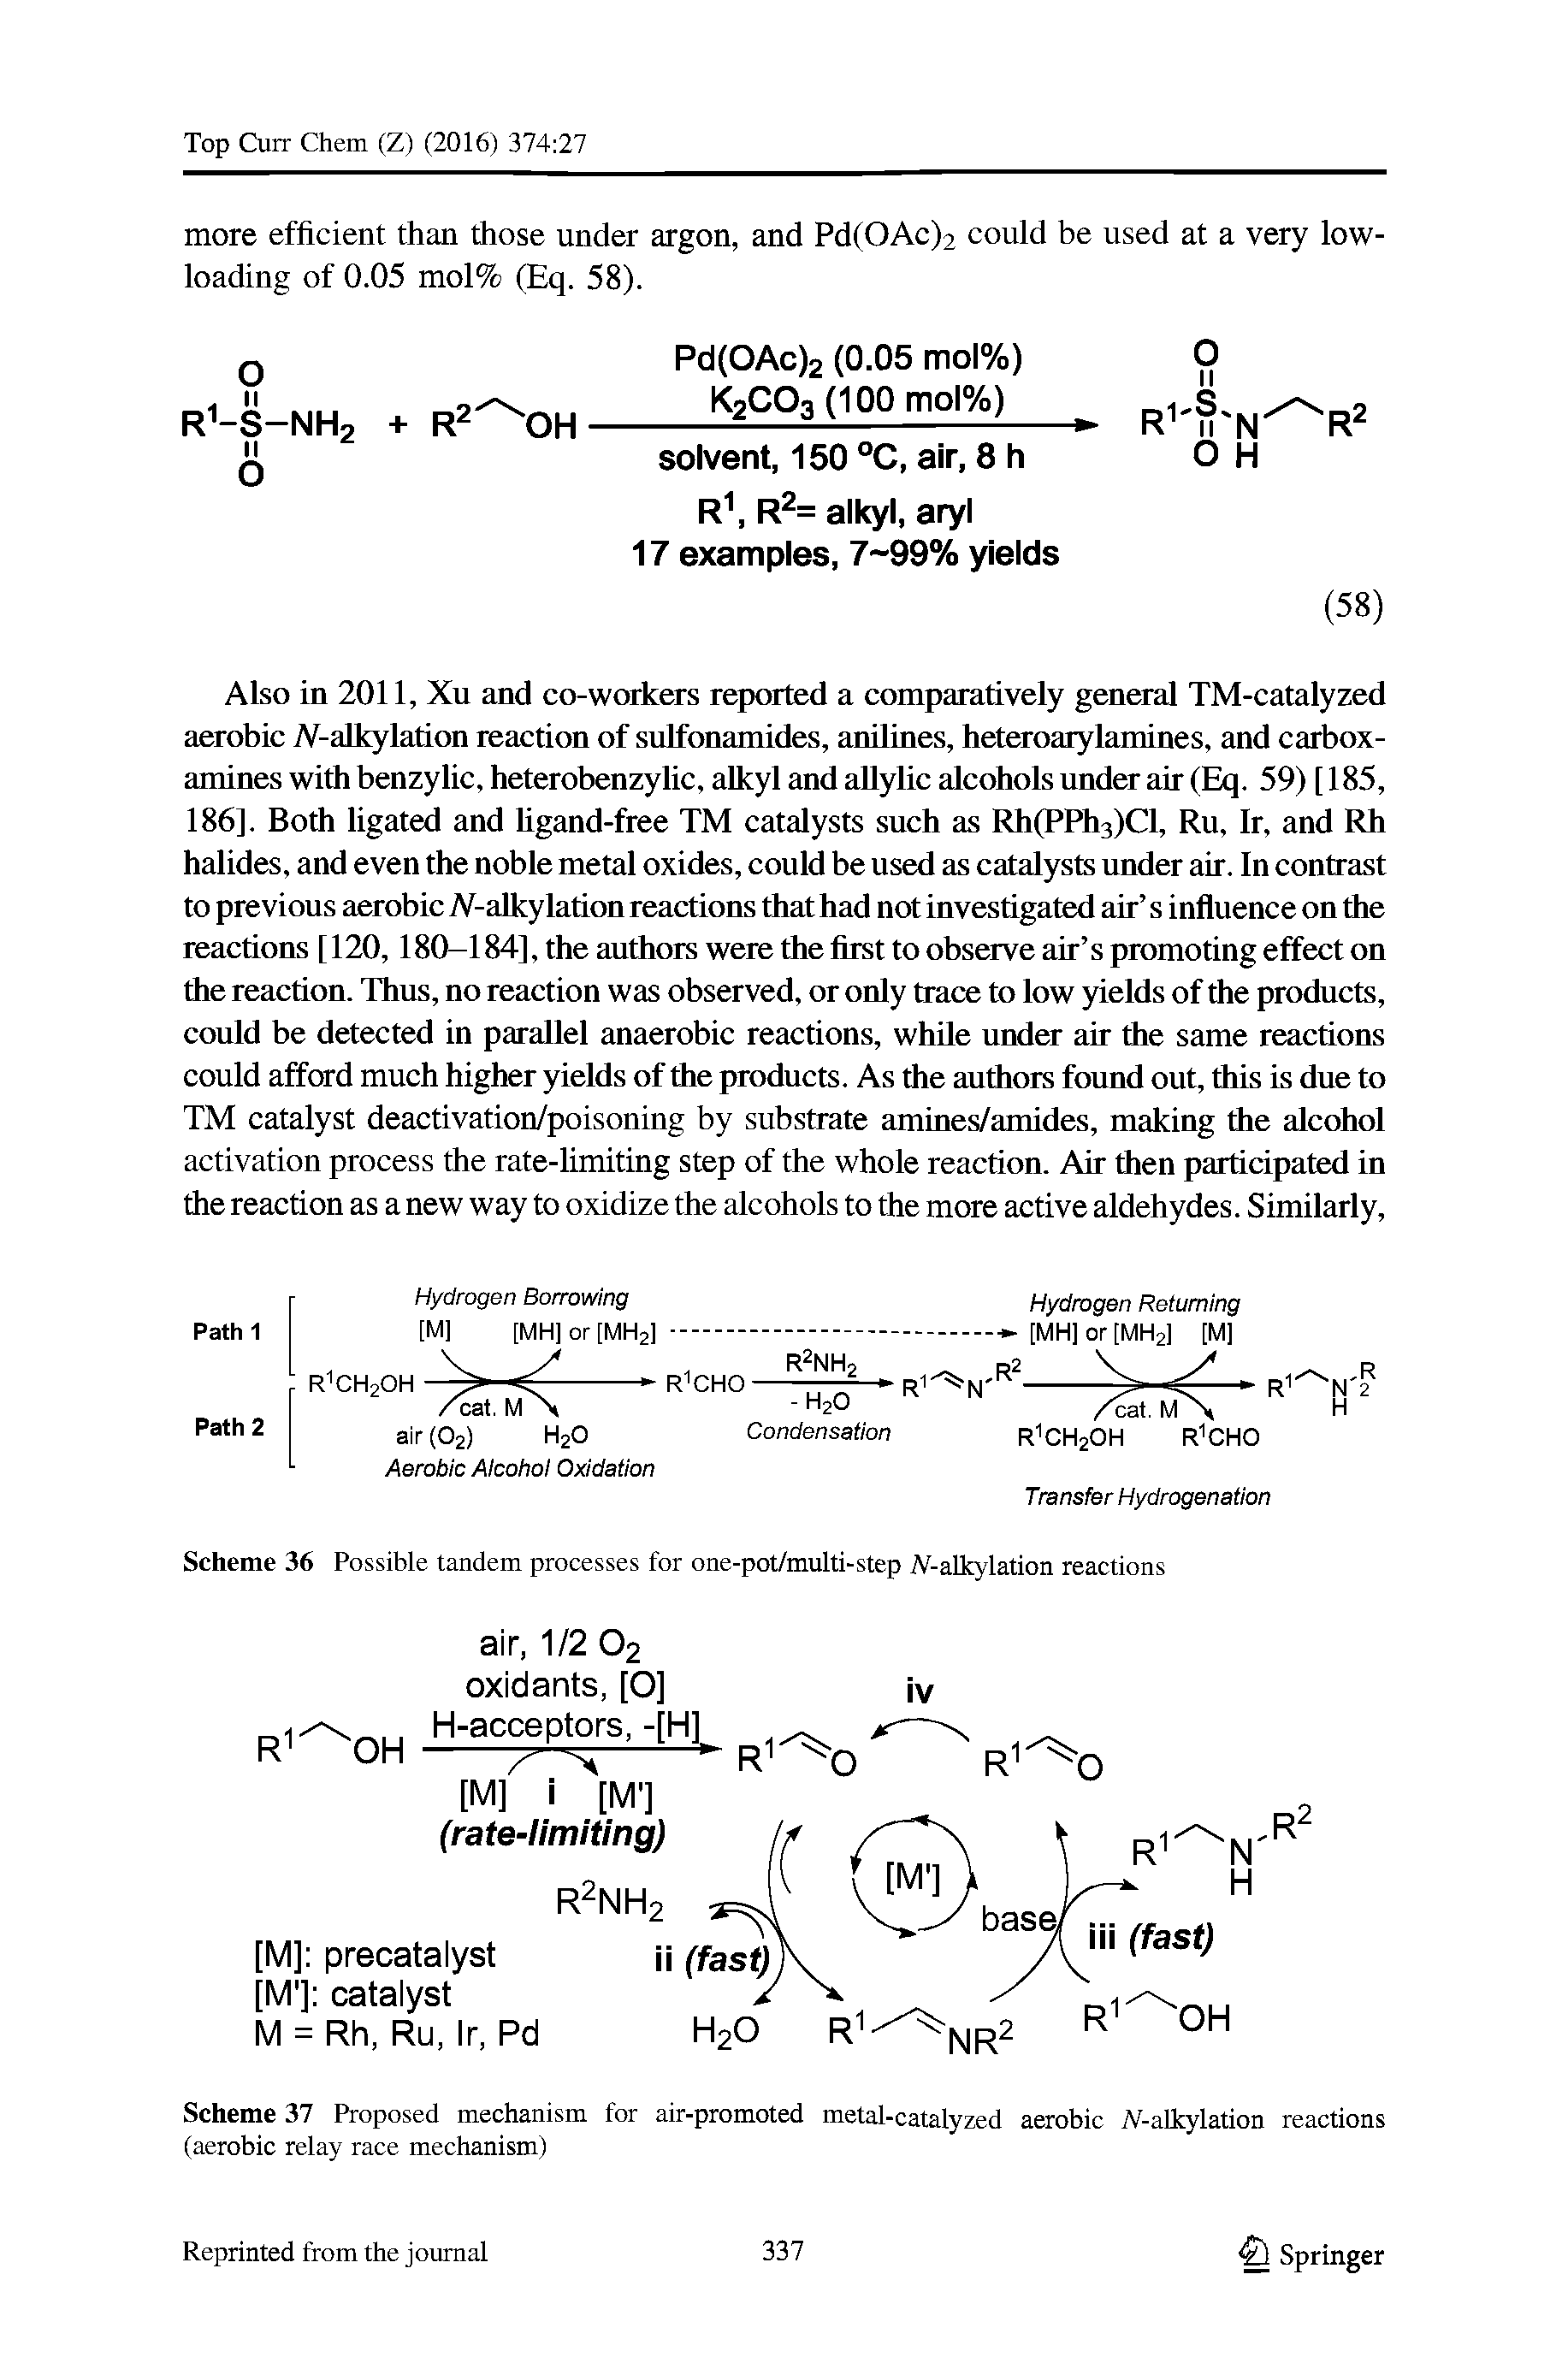 Scheme 37 Proposed mechanism for air-promoted metal-catalyzed aerobic iV-alkylation reactions (aerobic relay race mechanism)...